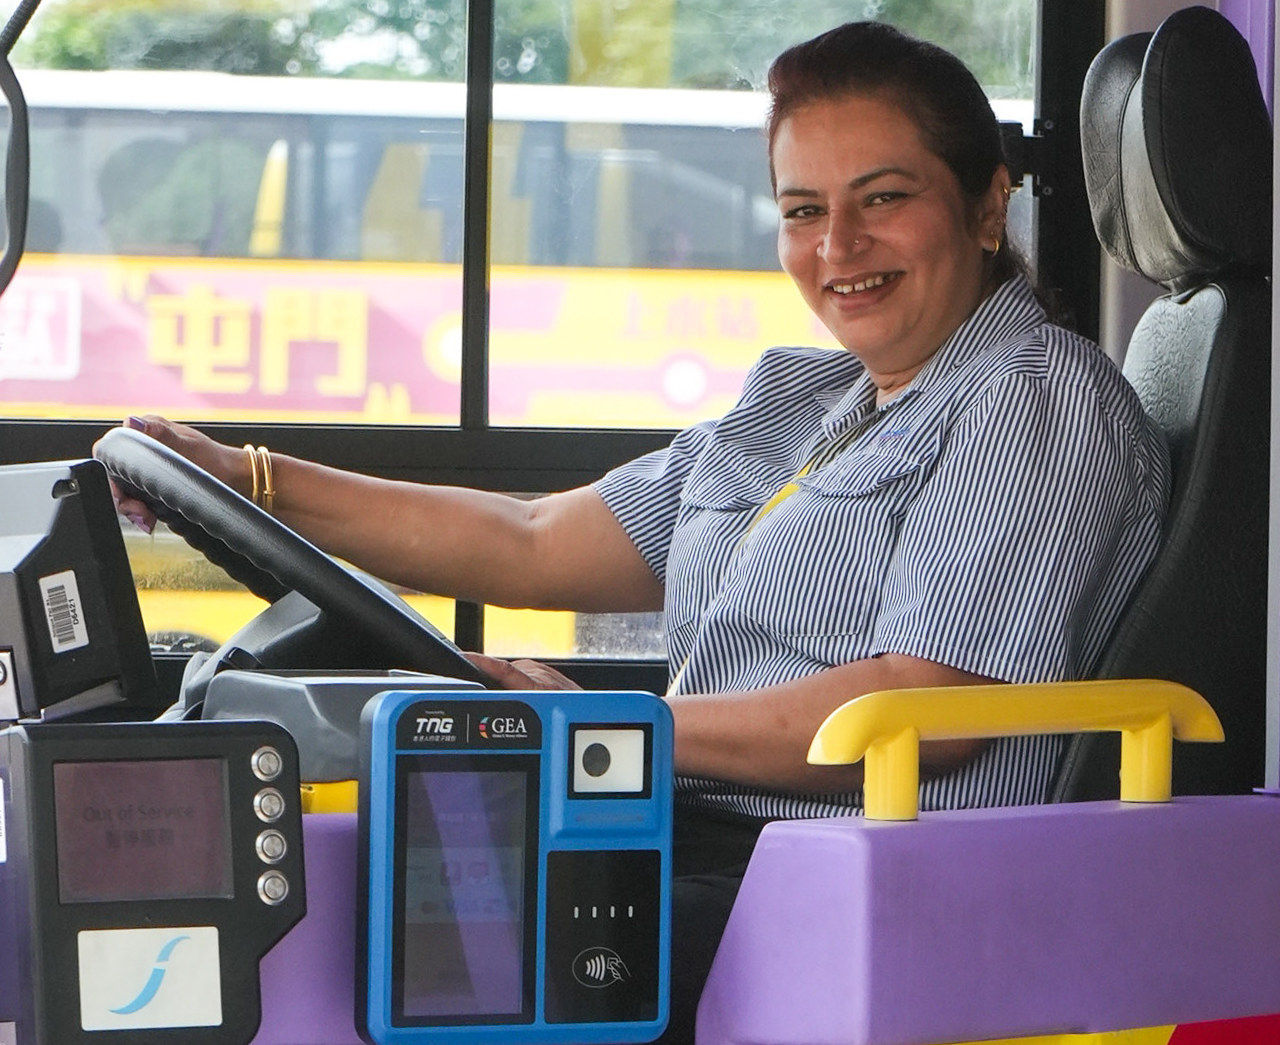 Farzana, 46, is part of growing number of women from ethnic minority groups joining Citybus, which is pushing for greater diversity in its hiring. Photo: Handout